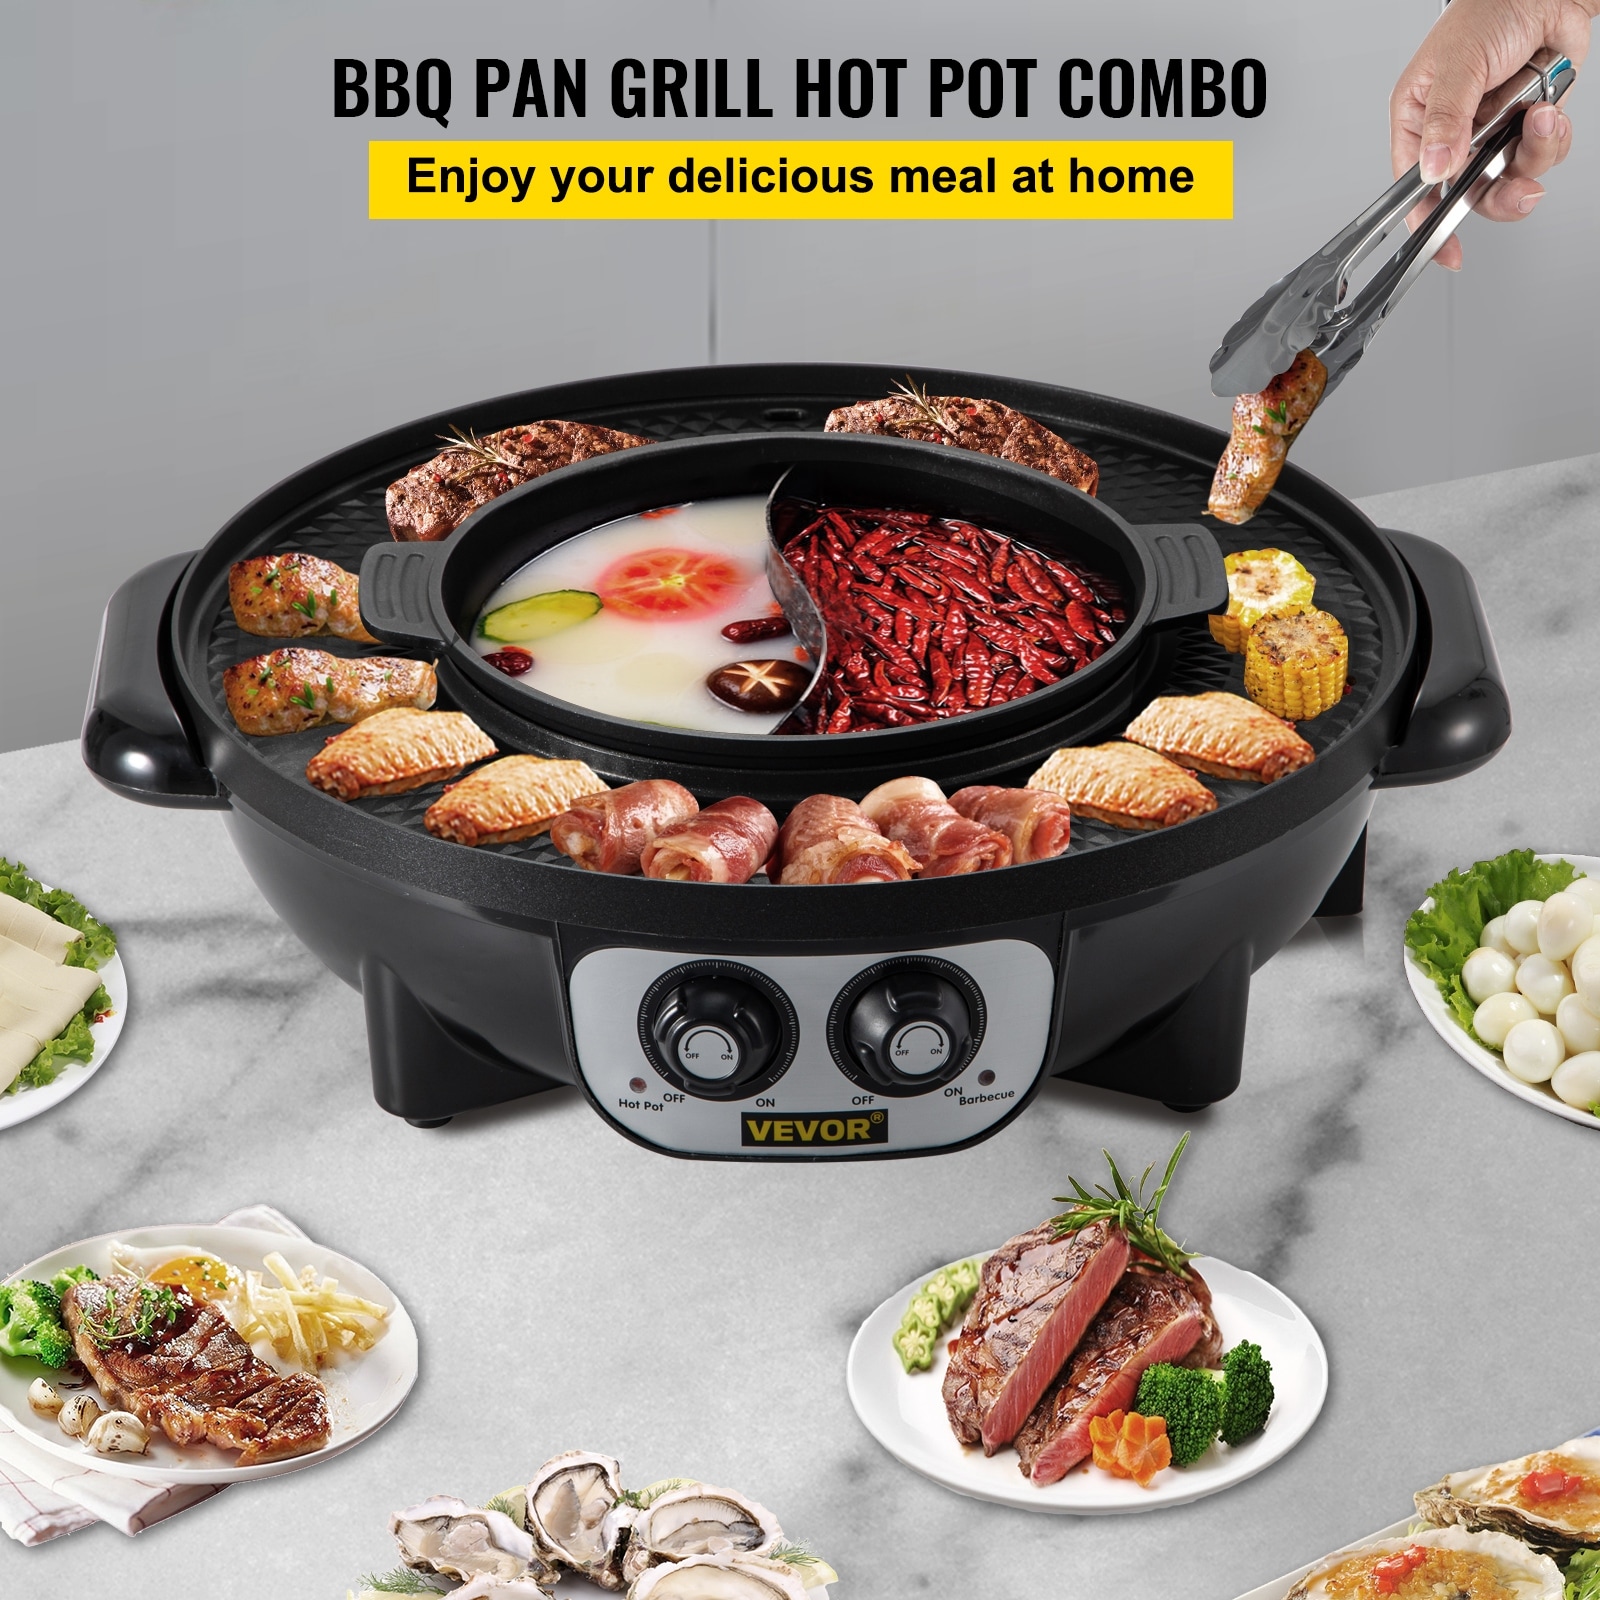 https://ak1.ostkcdn.com/images/products/is/images/direct/94fb525356ba5fe4e722f7d6c1e436decdca8948/VEVOR-2-in-1-Electric-Grill-and-Hot-Pot-BBQ-Pan-Grill-and-Hot-Pot-Multifunctional-Teppanyaki-Grill-Pot-with-Dual-Temp-Control.jpg